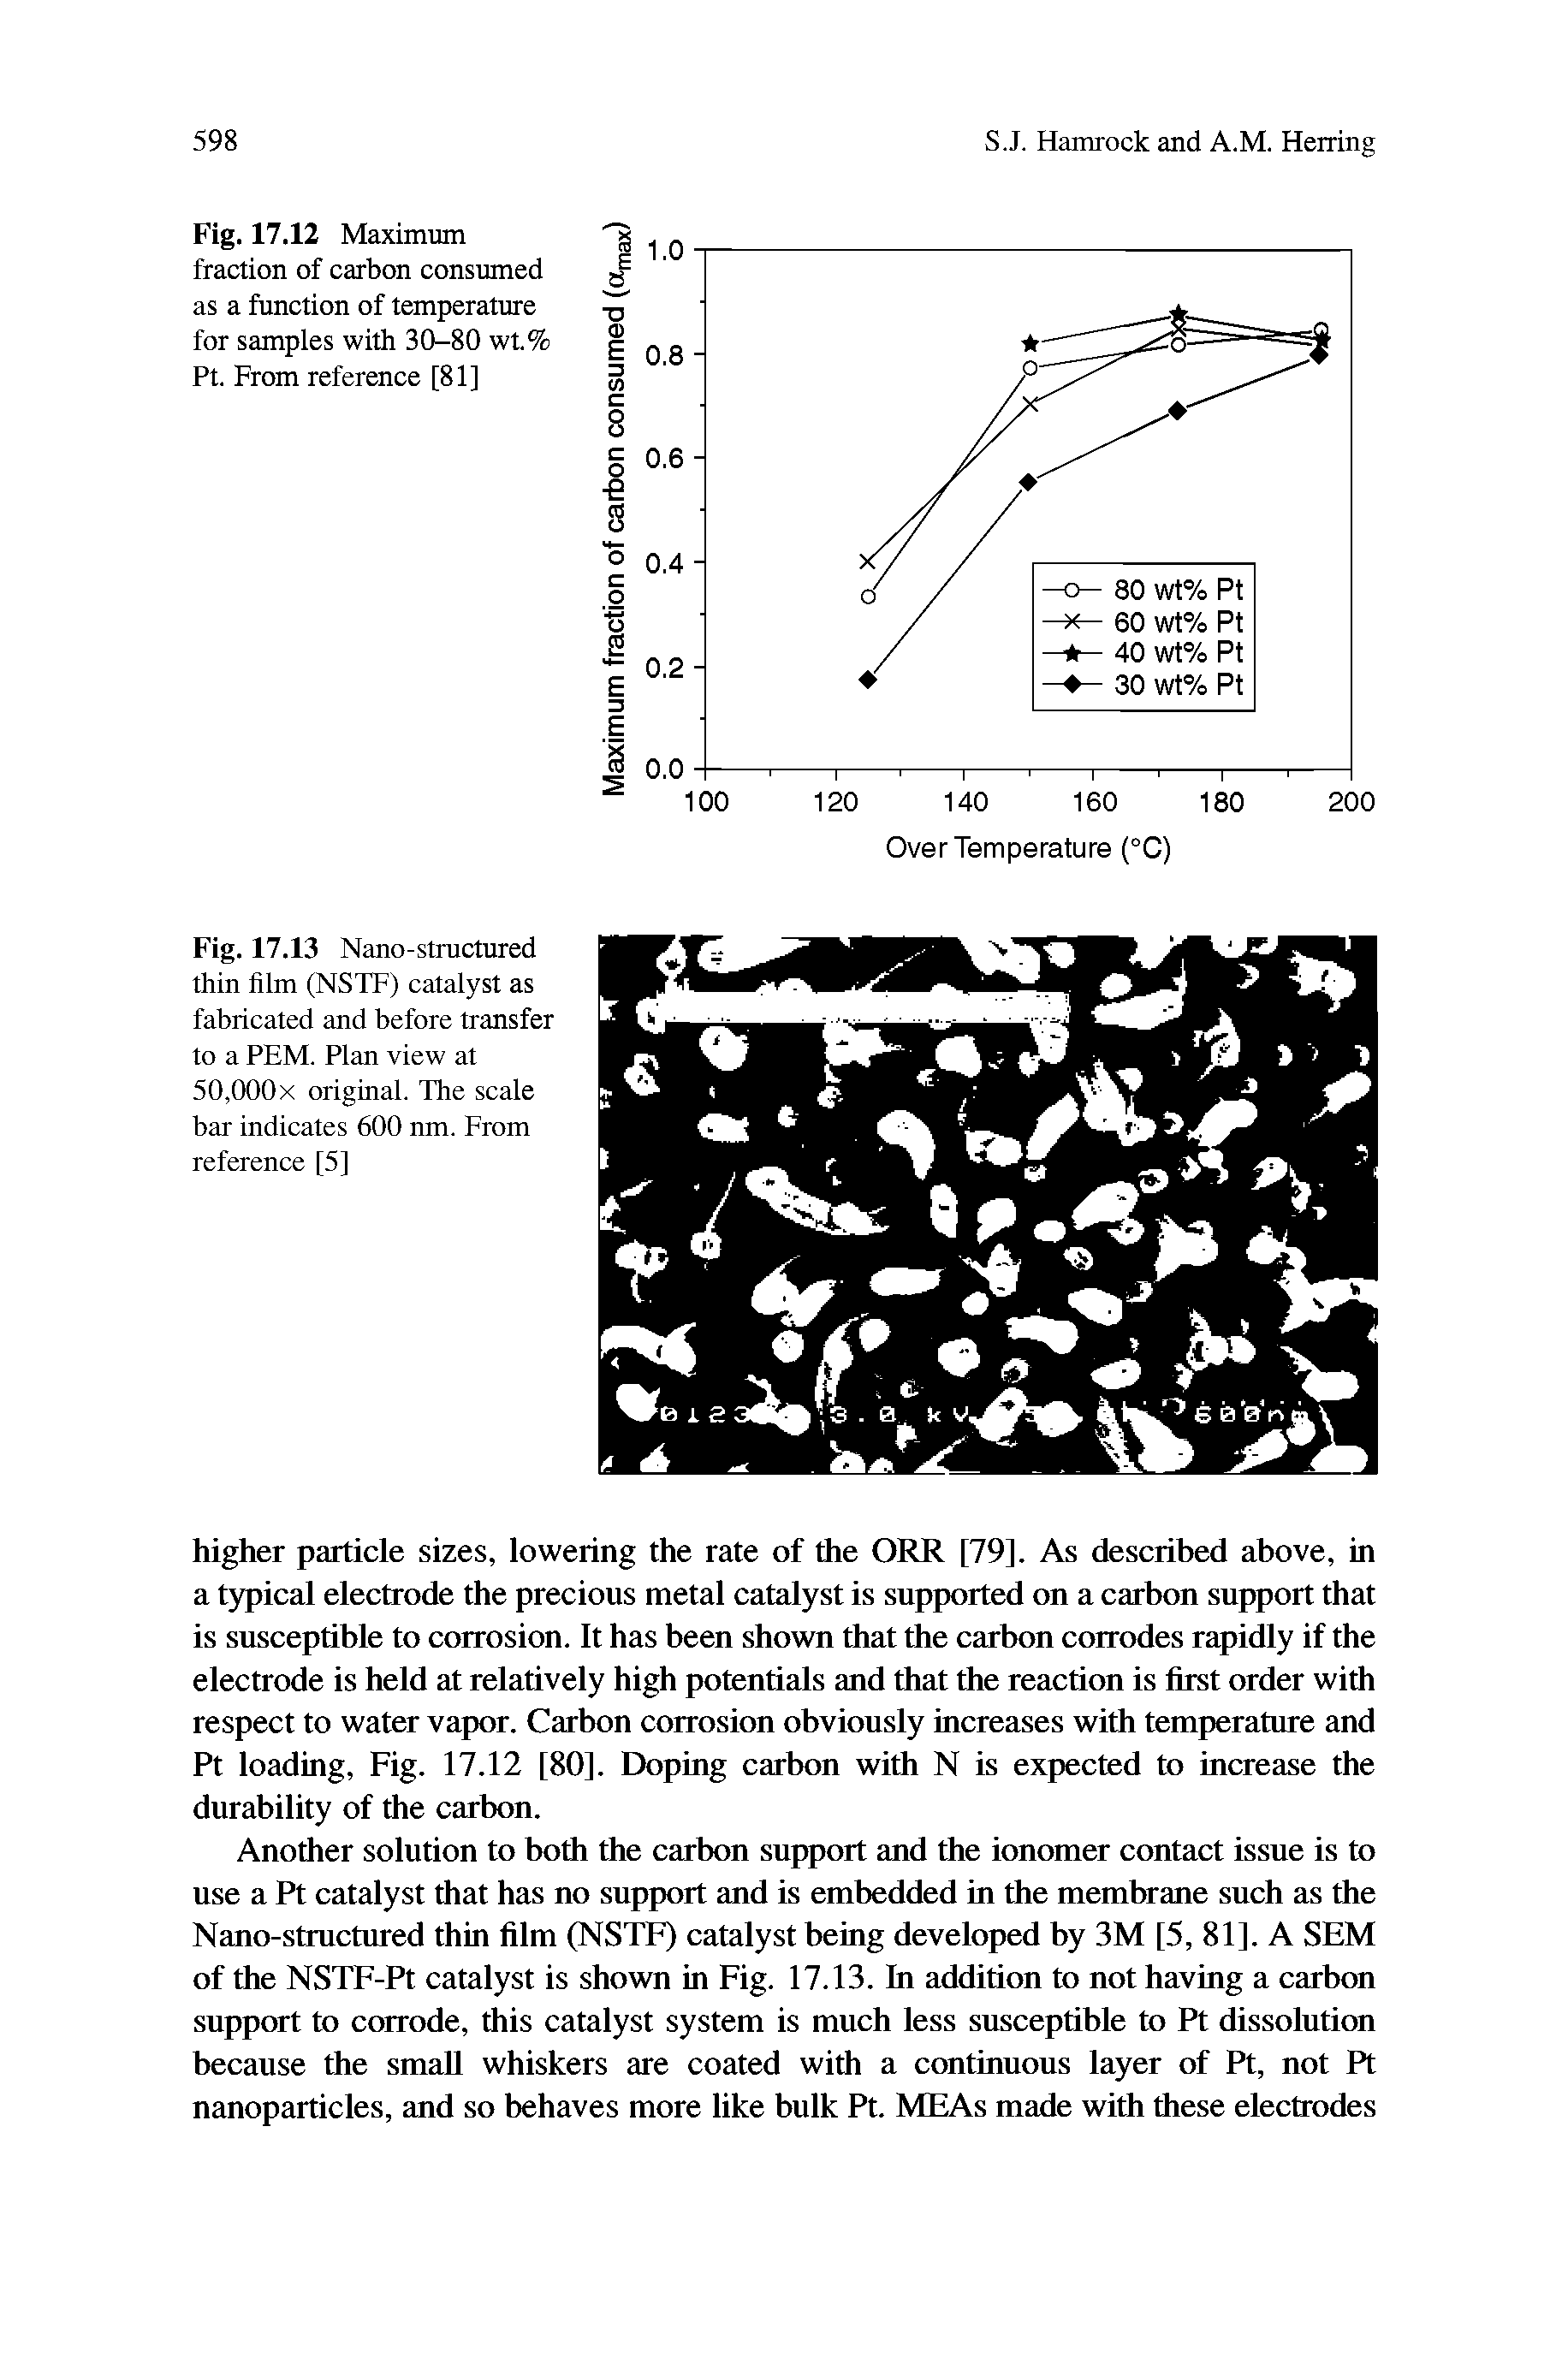 Fig. 17.13 Nano-structured thin film (NSTF) catalyst as fabricated and before transfer to a PEM. Plan view at 50,000x original. The scale bar indicates 600 nm. From reference [5]...